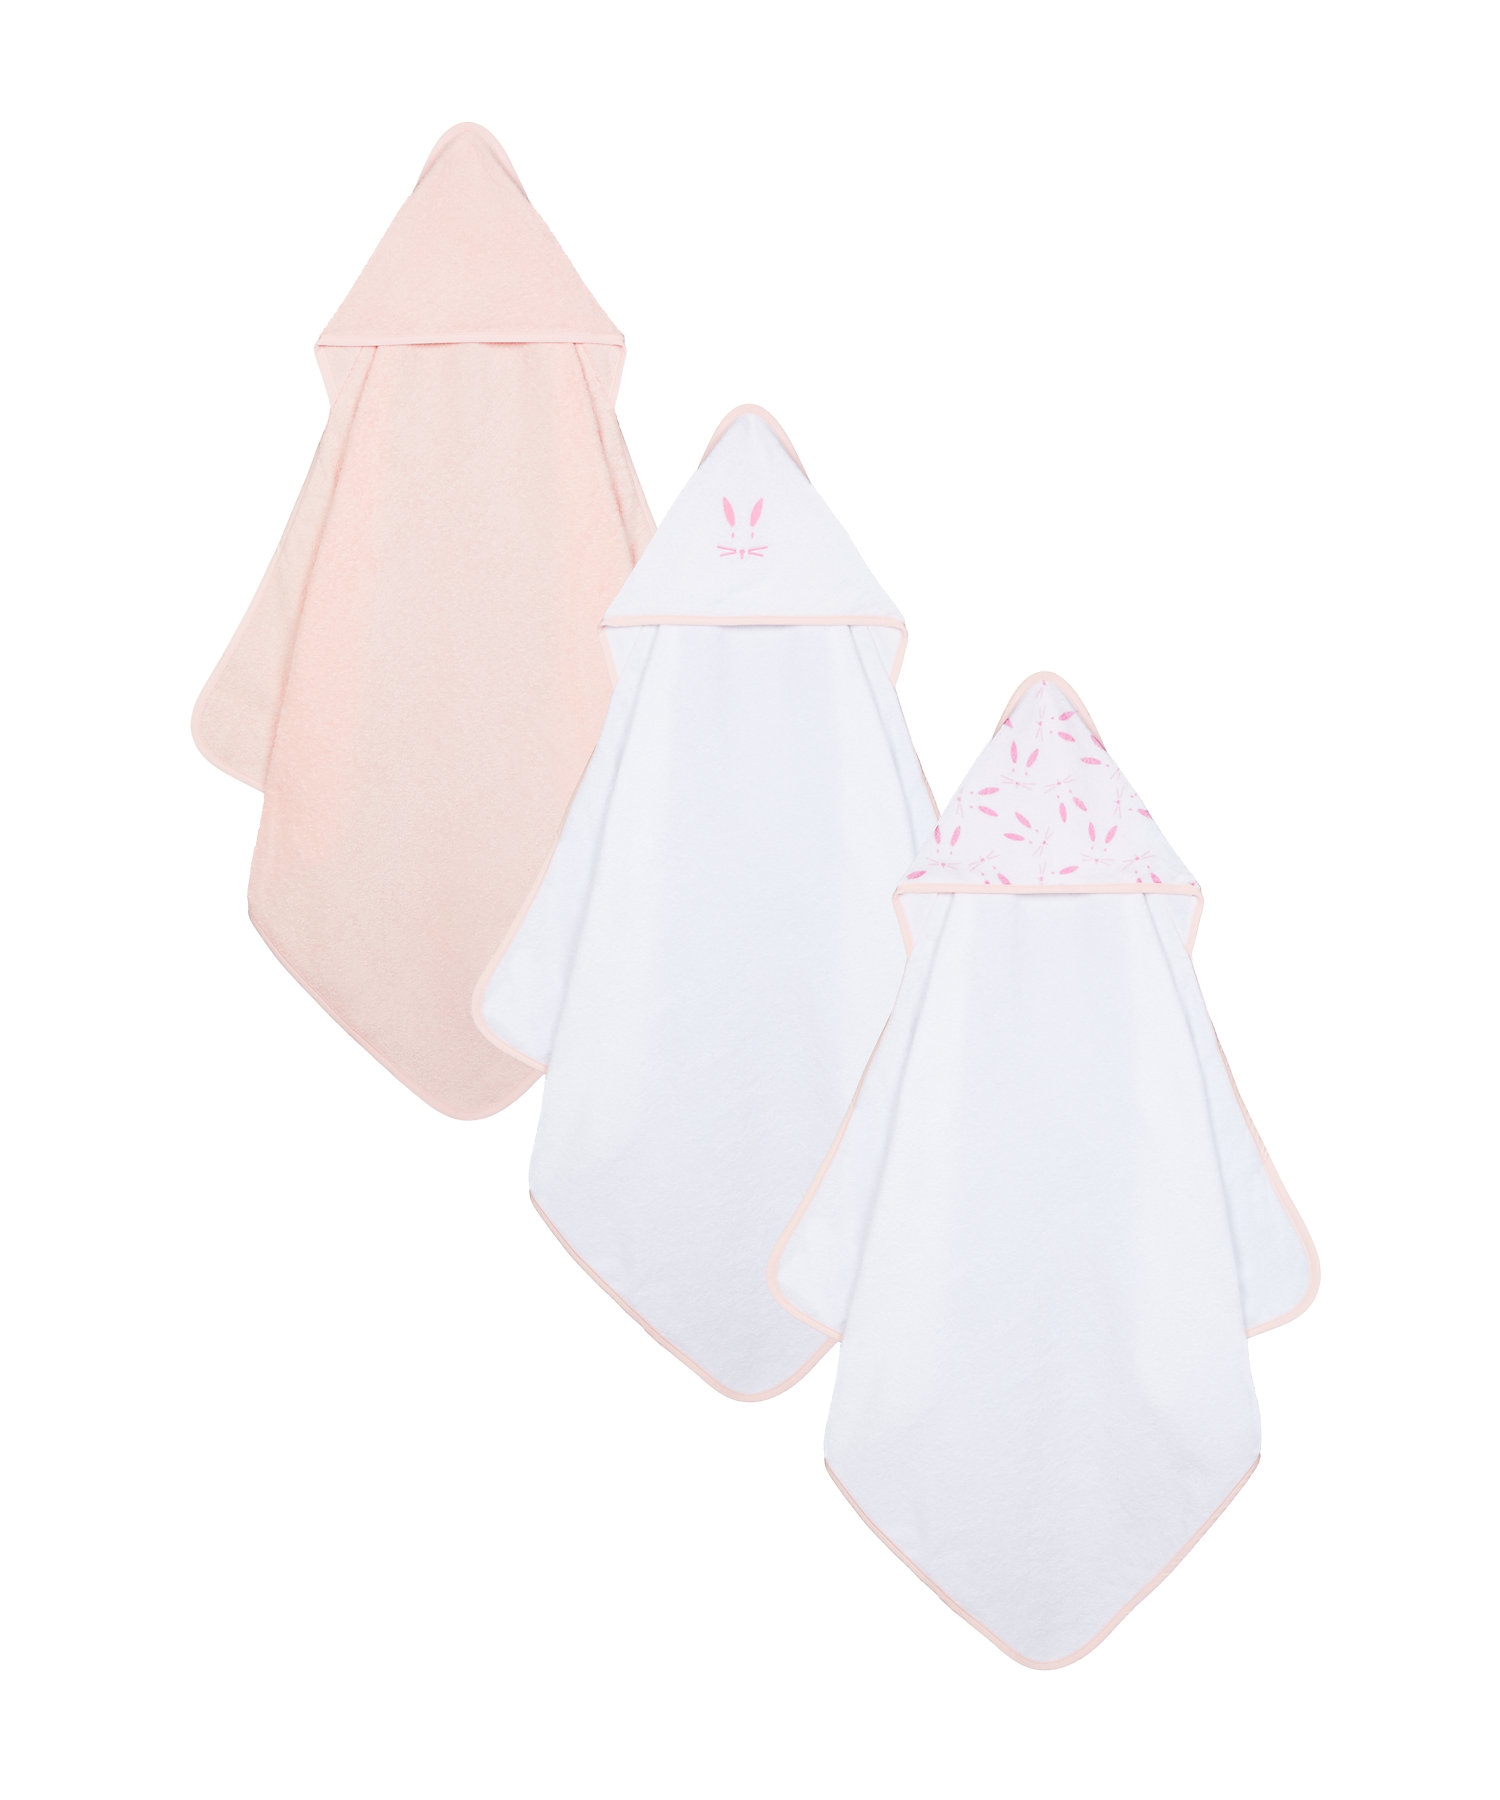 Mothercare | Mothercare 3 pack Cuddle and Dry Baby Towels Pink